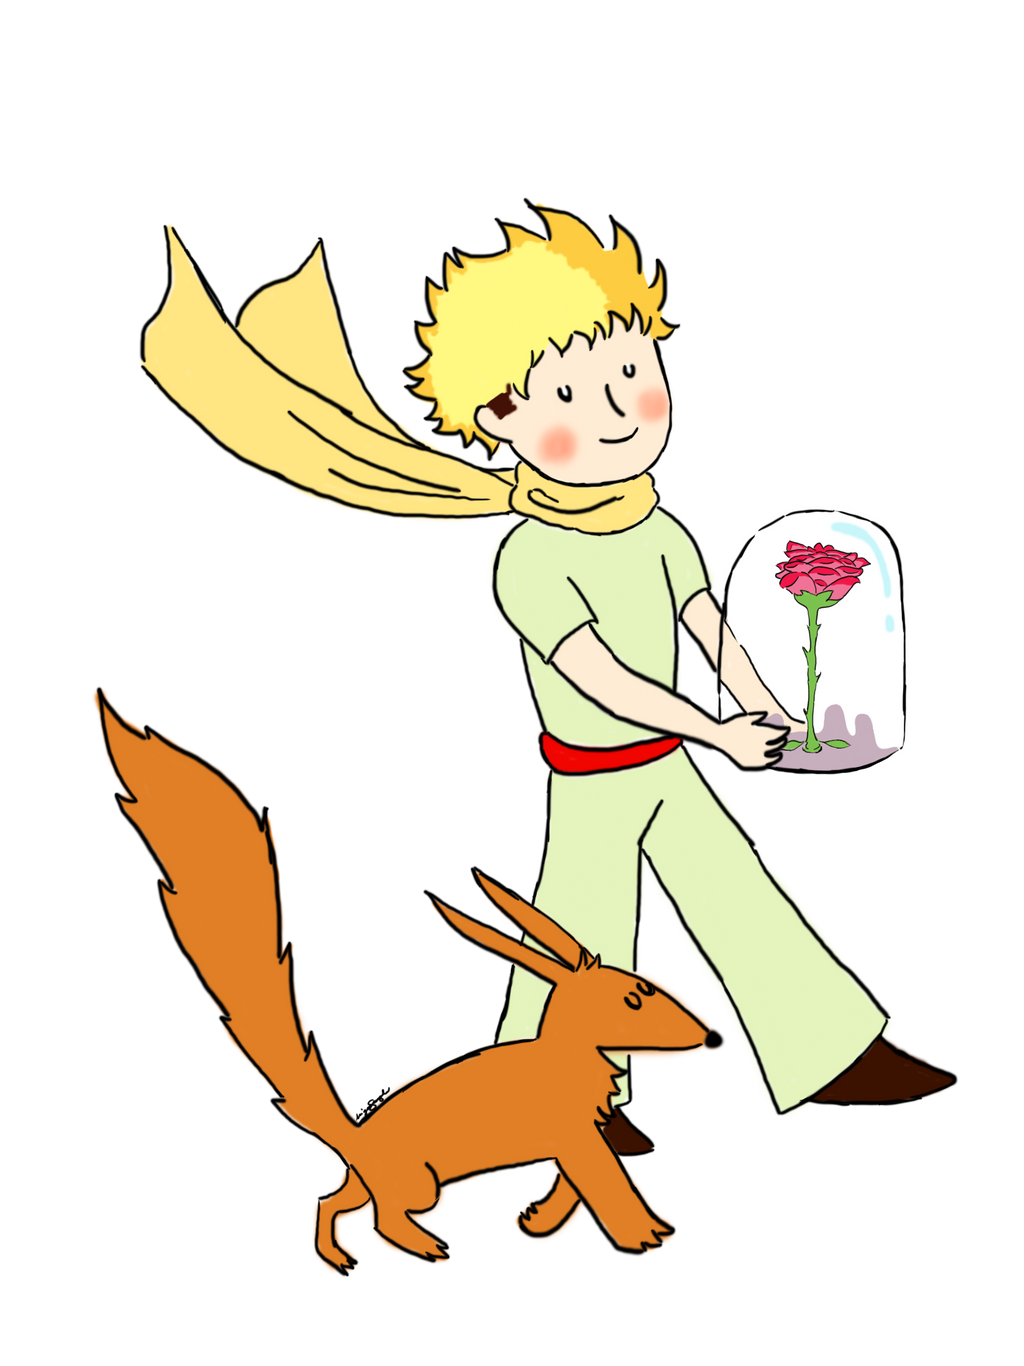 The little prince with his rose and fox by astral-berry on DeviantArt